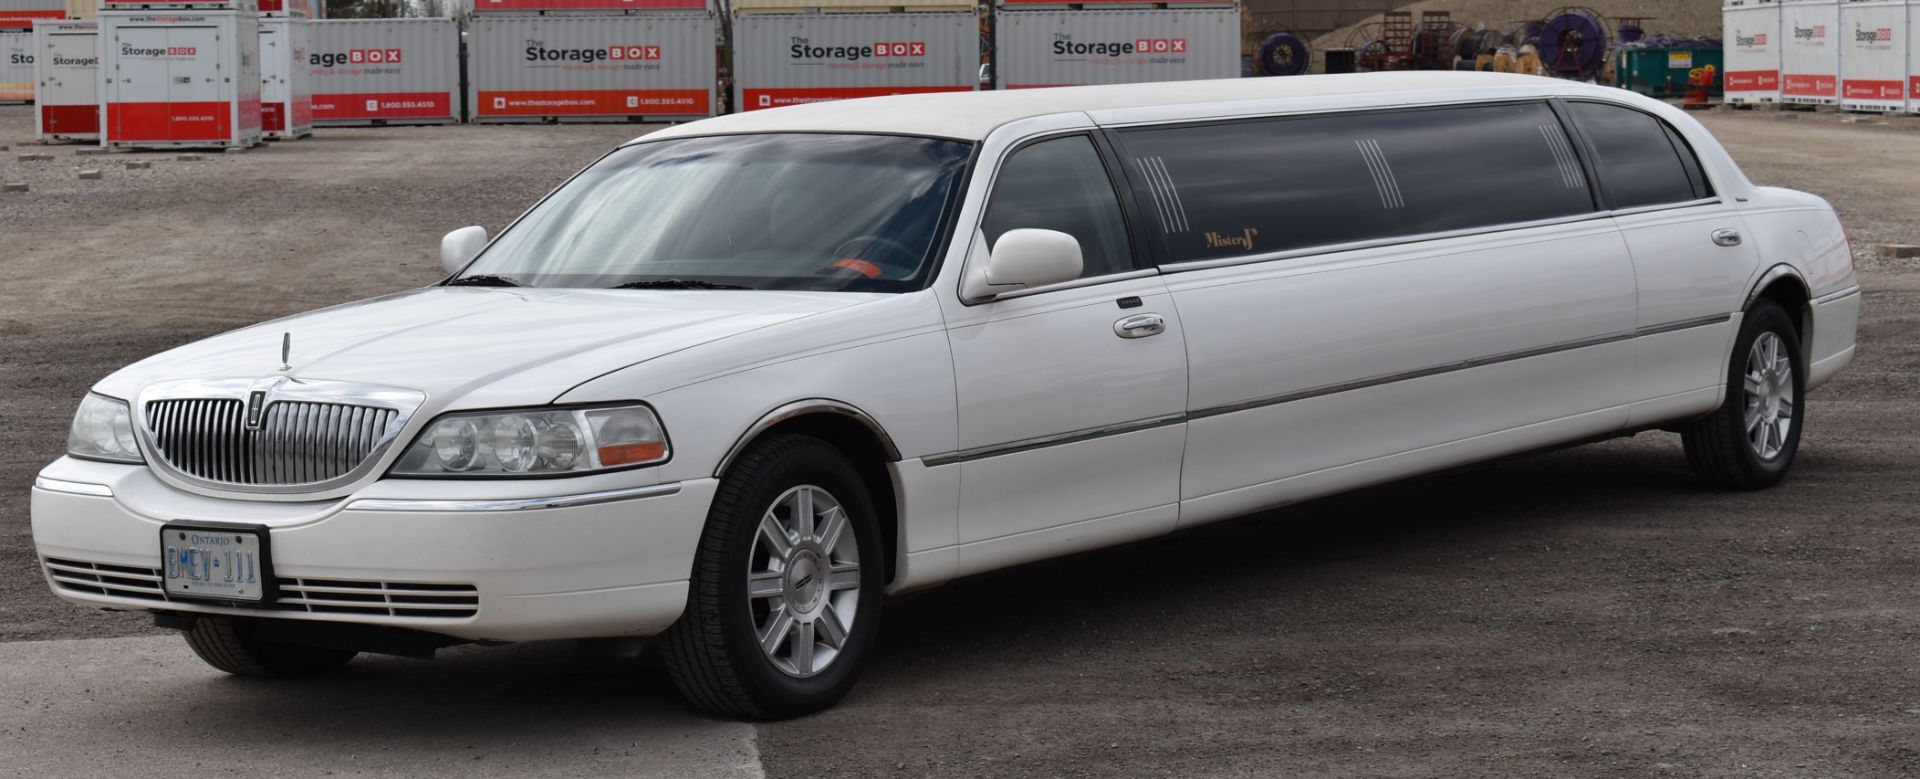 LINCOLN (2007) TOWN CAR 8 PASSENGER STRETCH LIMOUSINE WITH 8 CYLINDER 4.6L GAS ENGINE, 280,461KM (